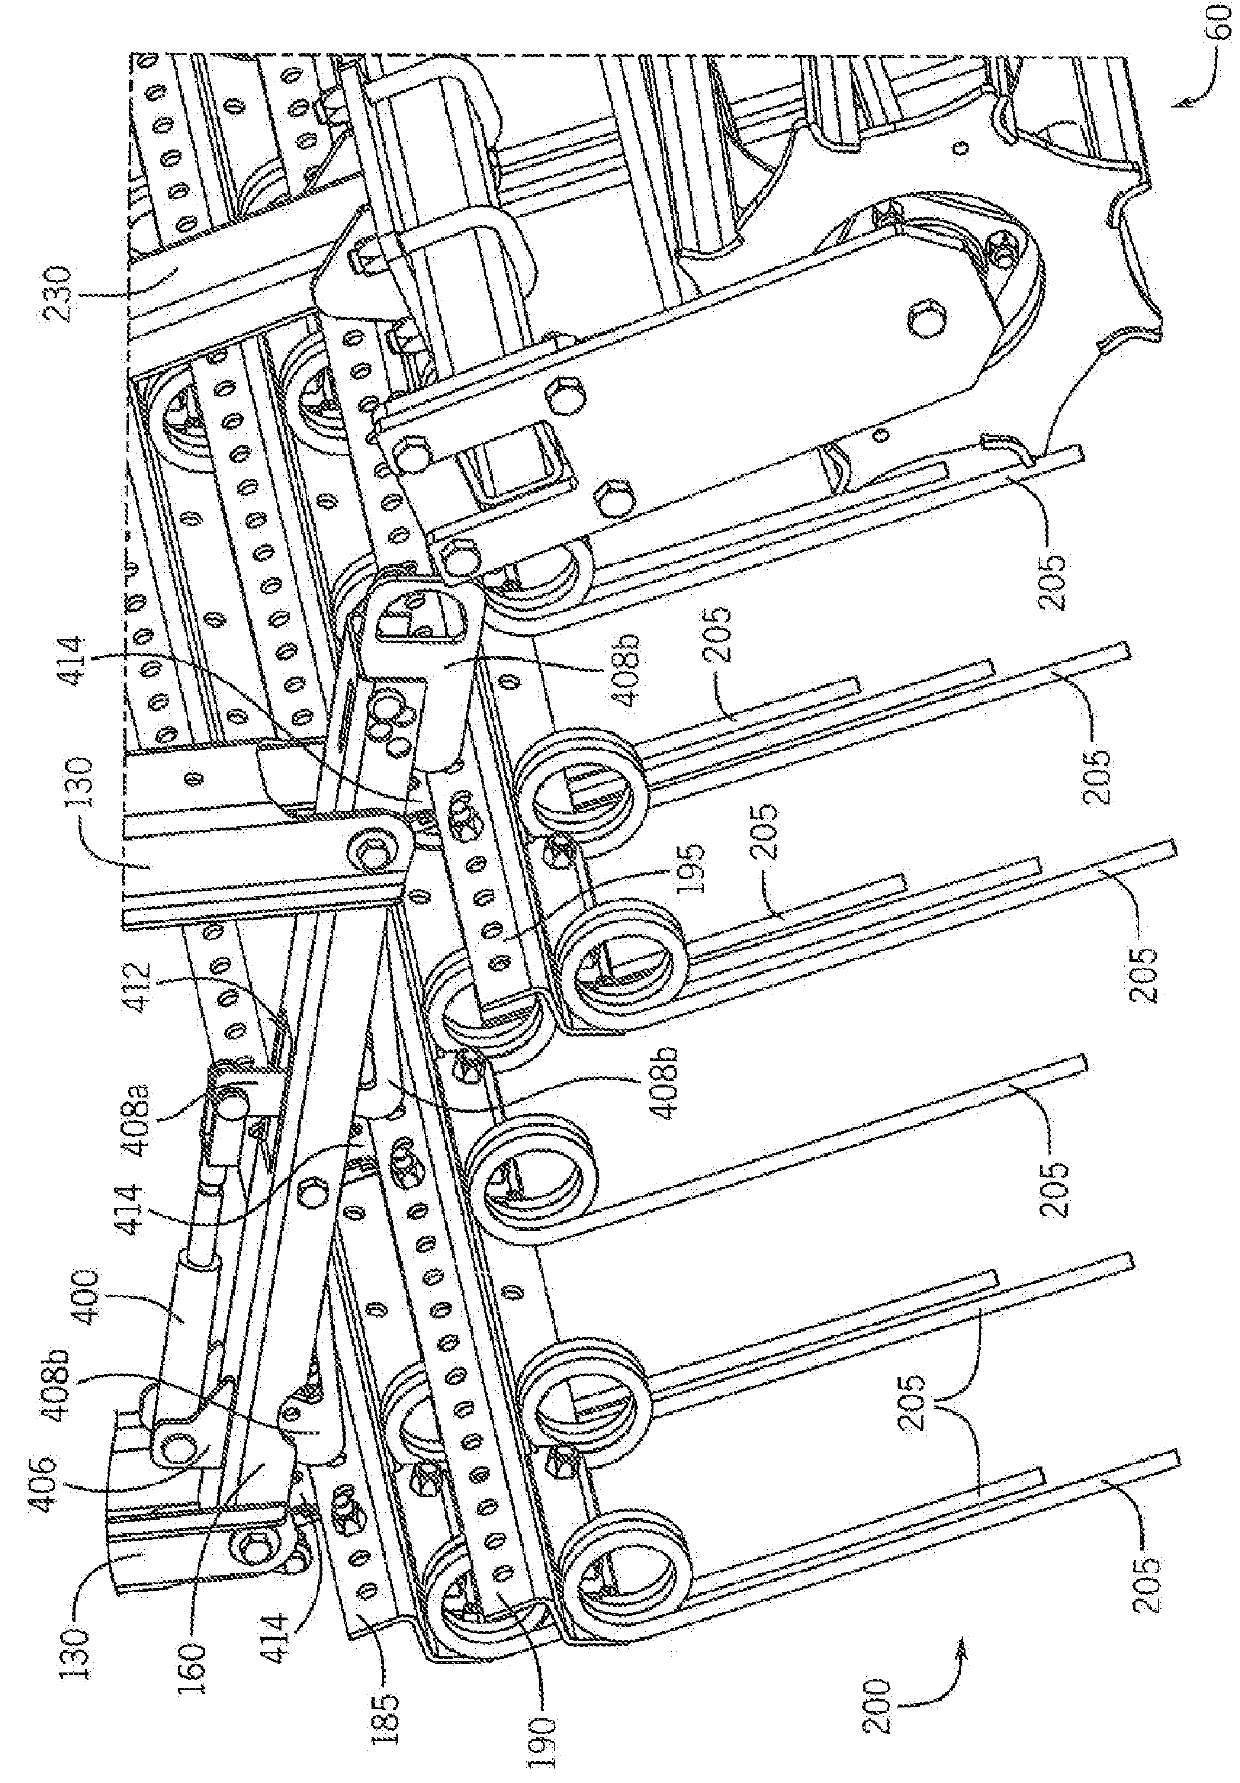 Electronic Control System For Adjusting Smoothing Tools Of A Harrow